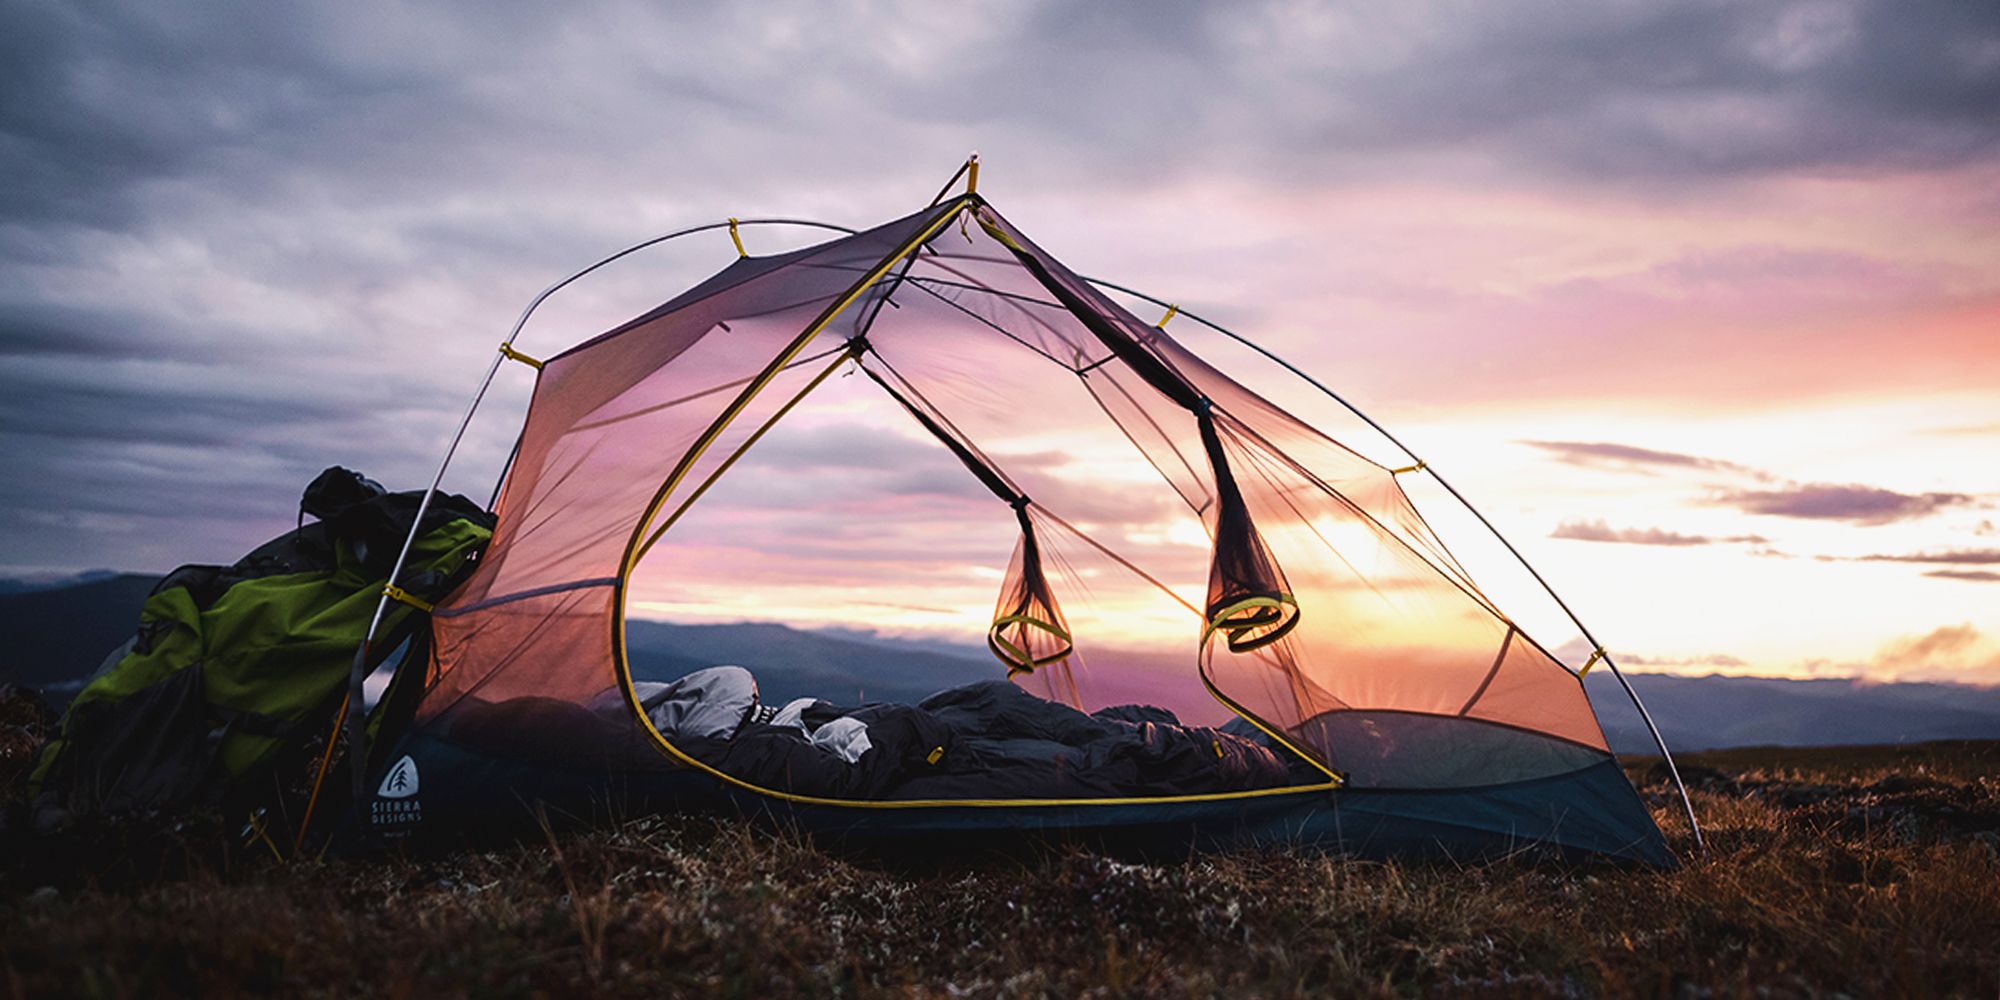 10 Best Camping Tents for 2019 - Durable Outdoor Tents for Camping